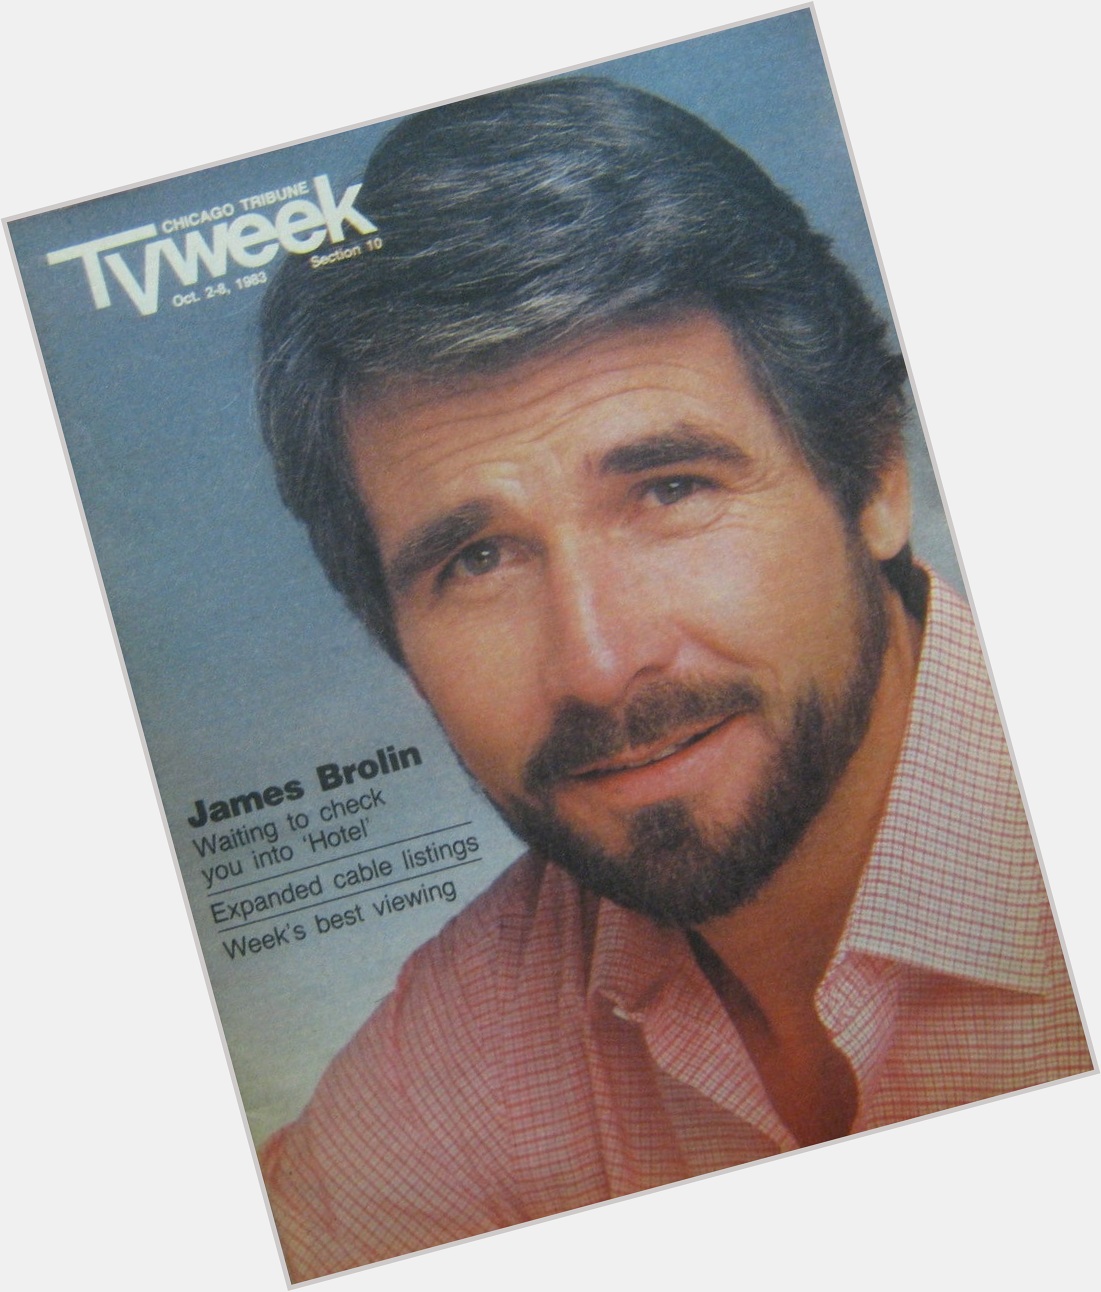 Happy Birthday to James Brolin,  born on this day in 1940
Chicago Tribune TV Week.  October 2-8, 1983 